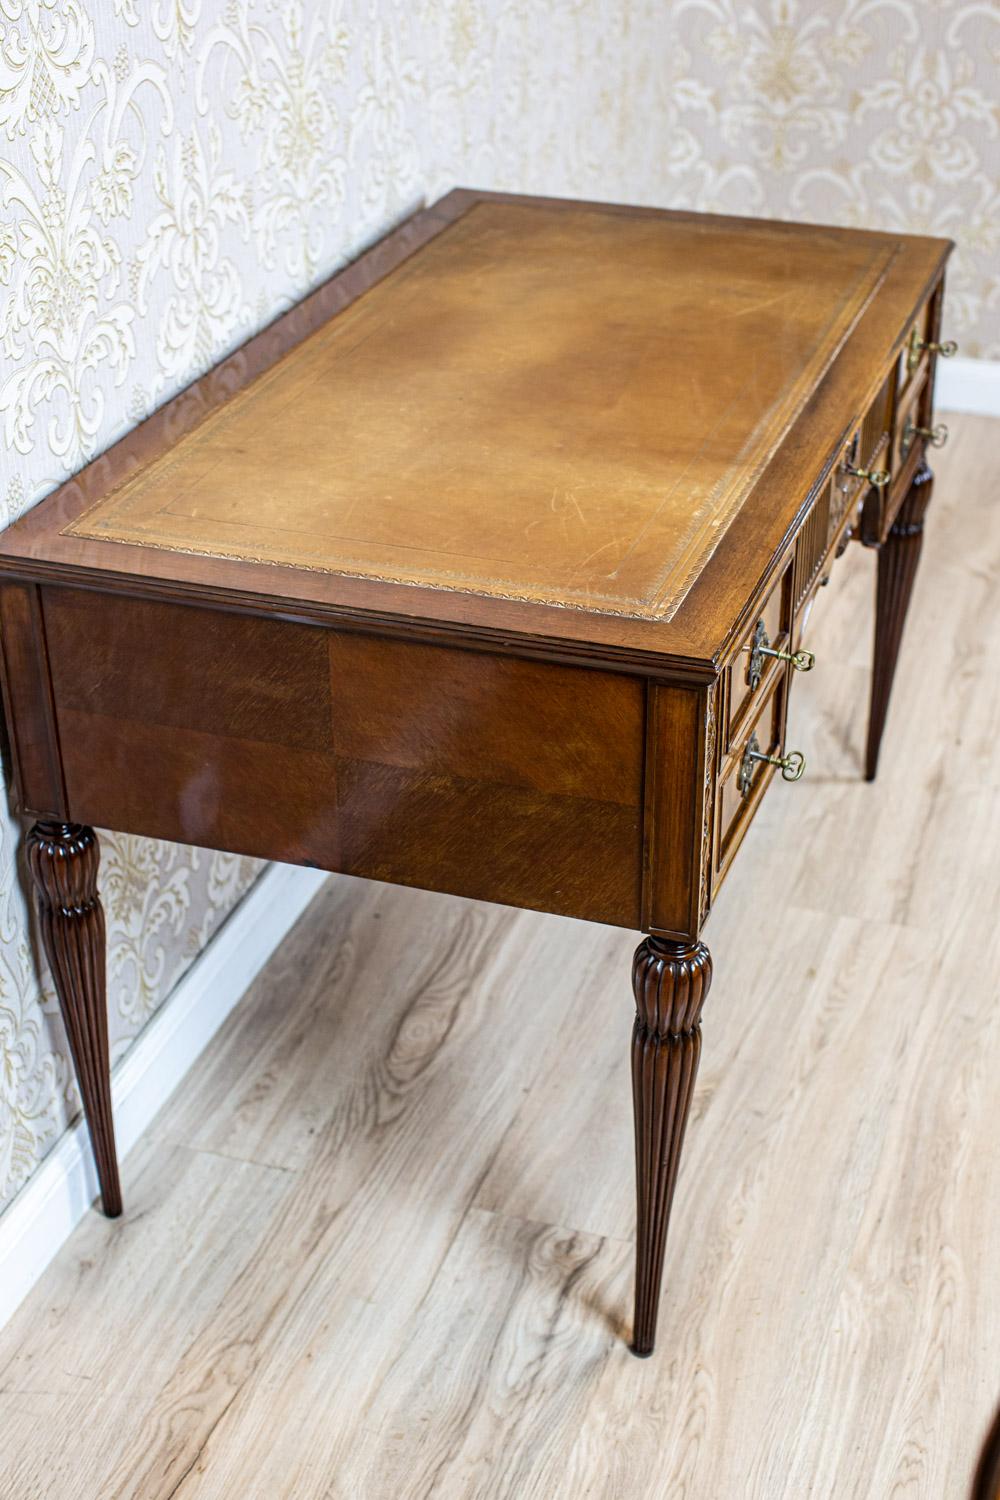 Lady's Mahogany Desk from the Late 19th Century in Brass Details 8